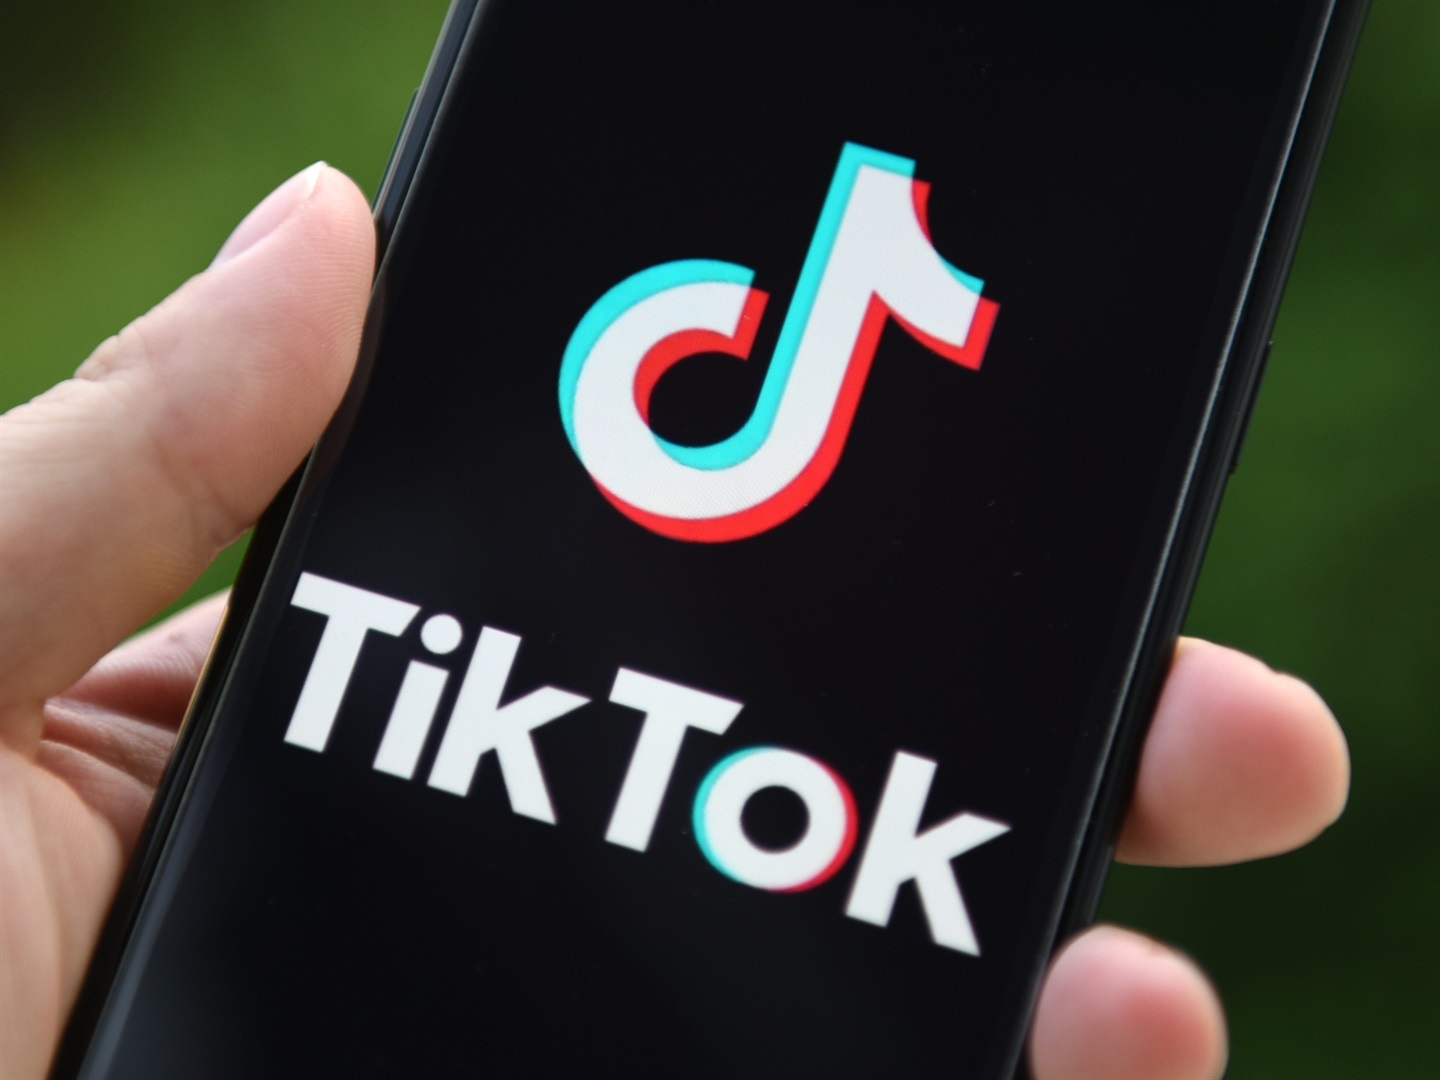 The UK may impose fines on Chinese company TikTok.